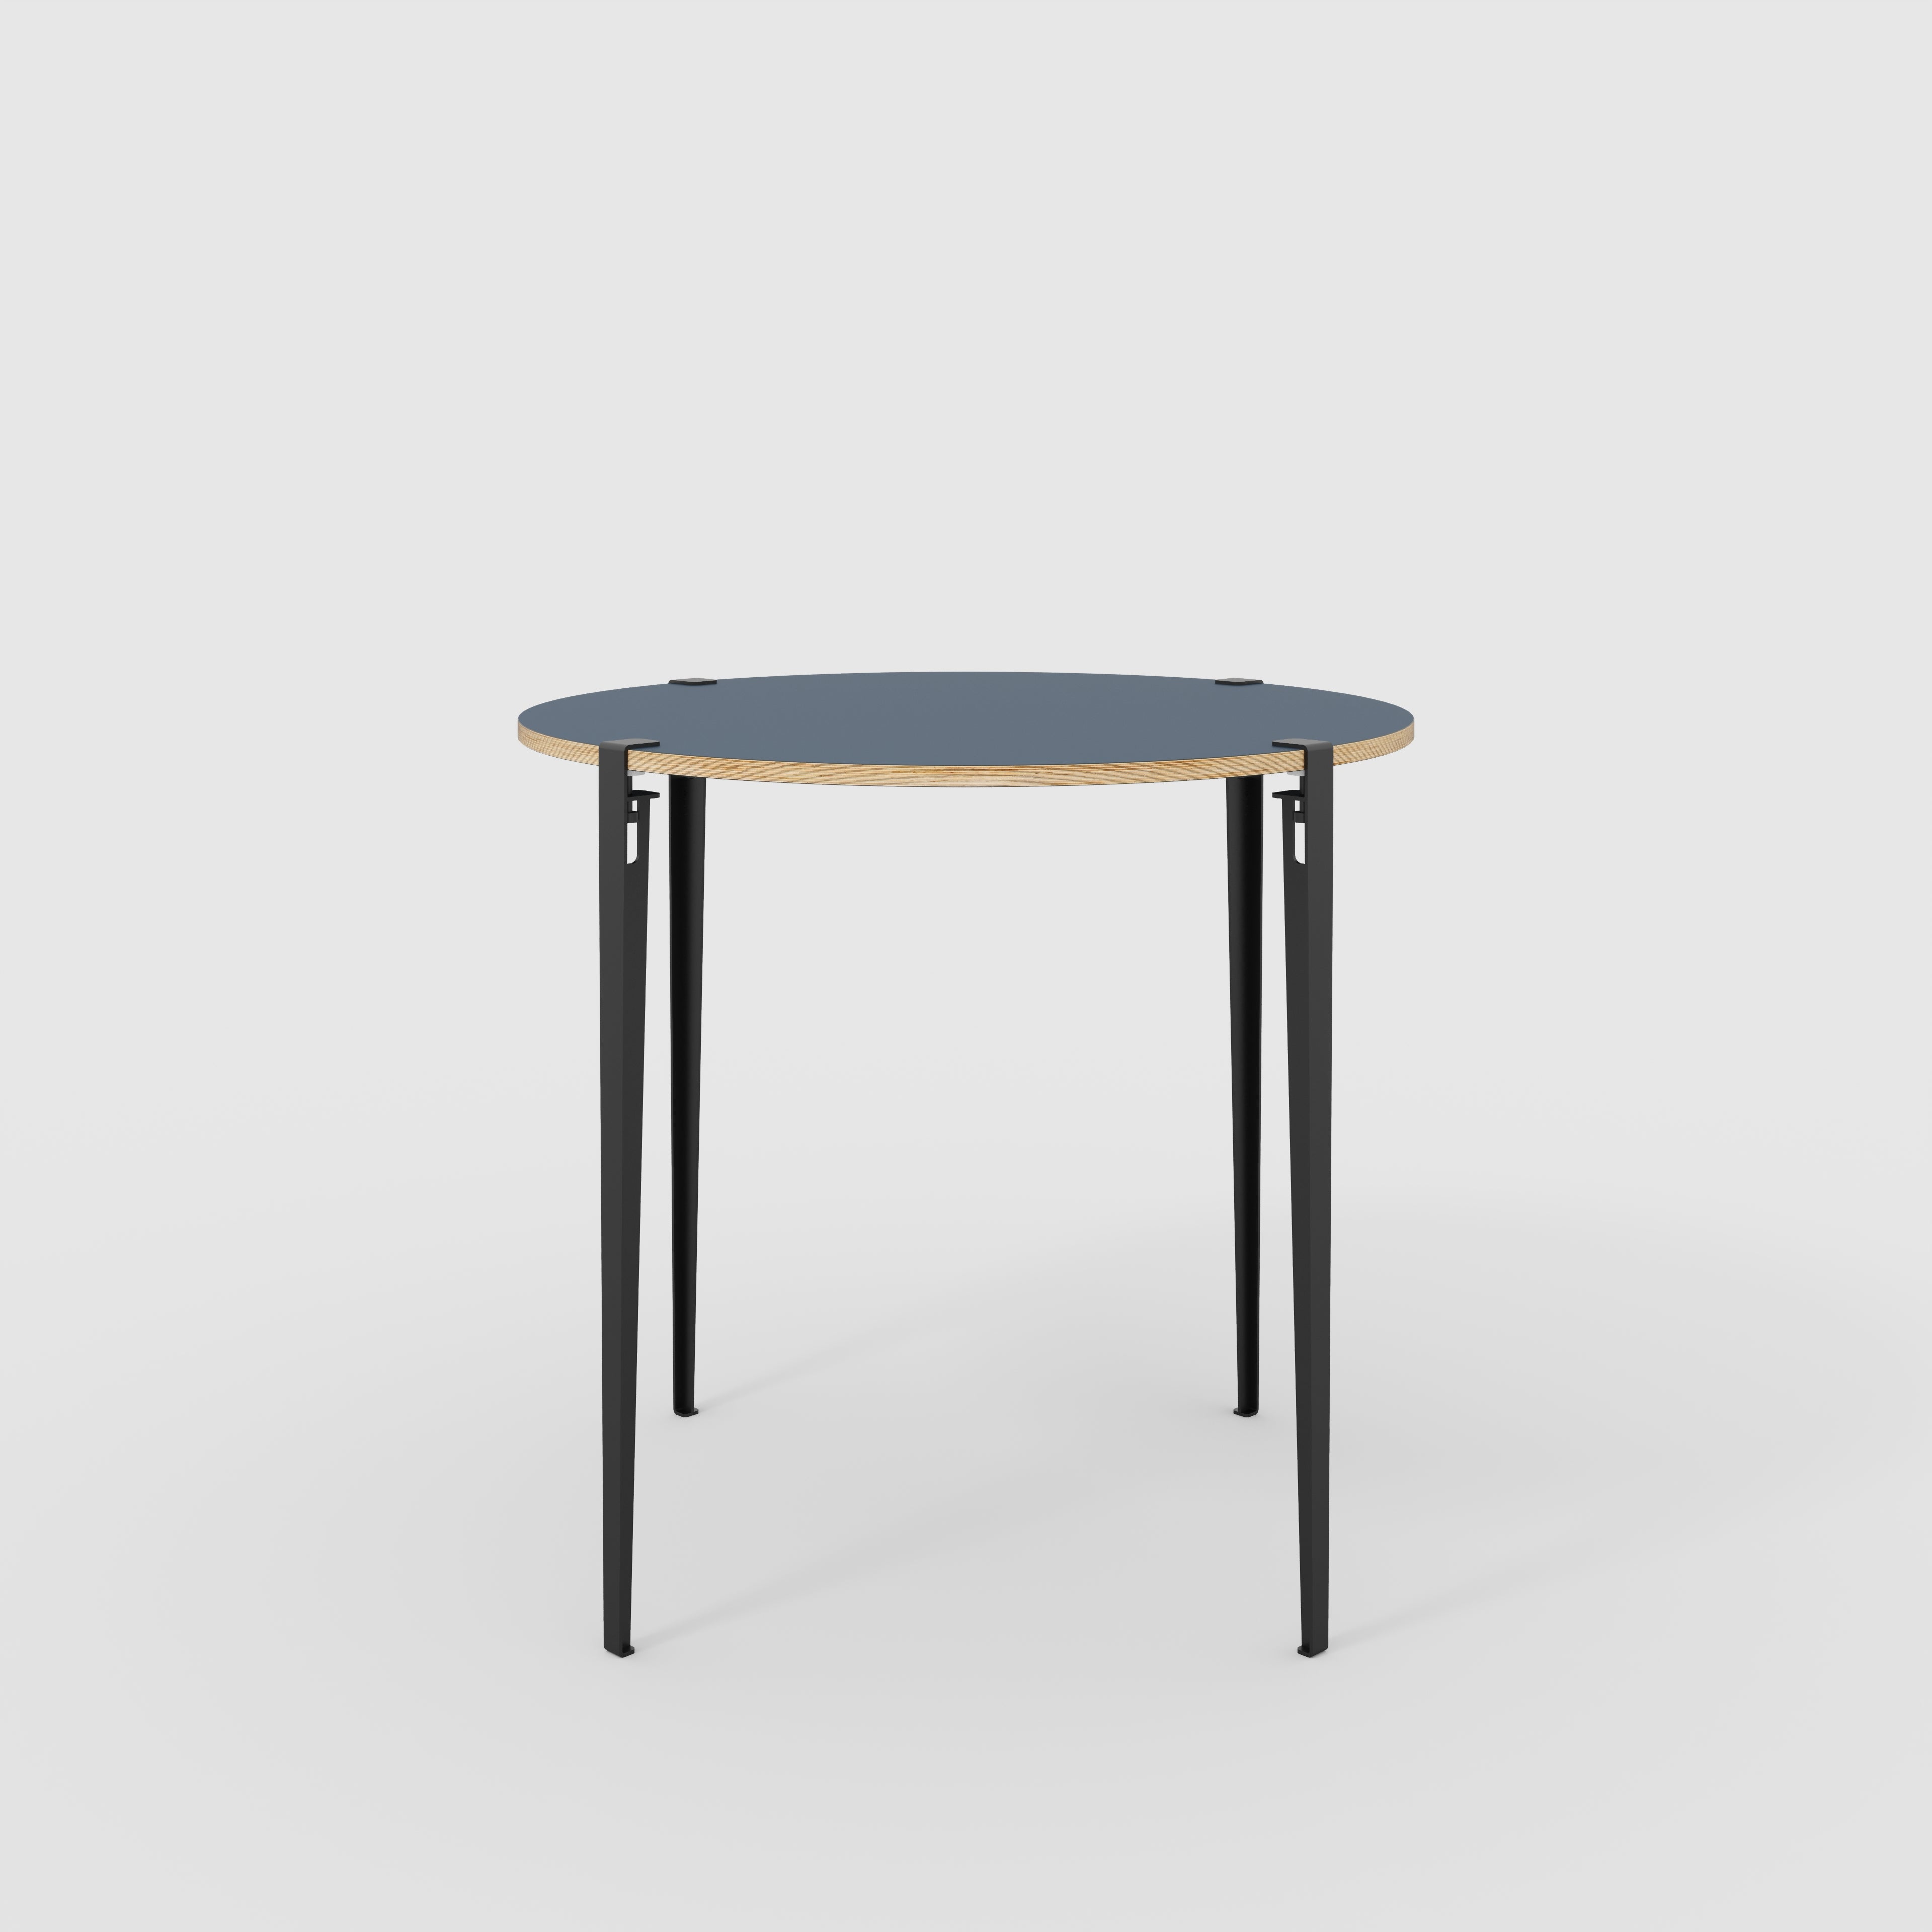 Round Table with Black Tiptoe Legs - Formica Night Sea Blue - 1200(dia) x 1100(h)